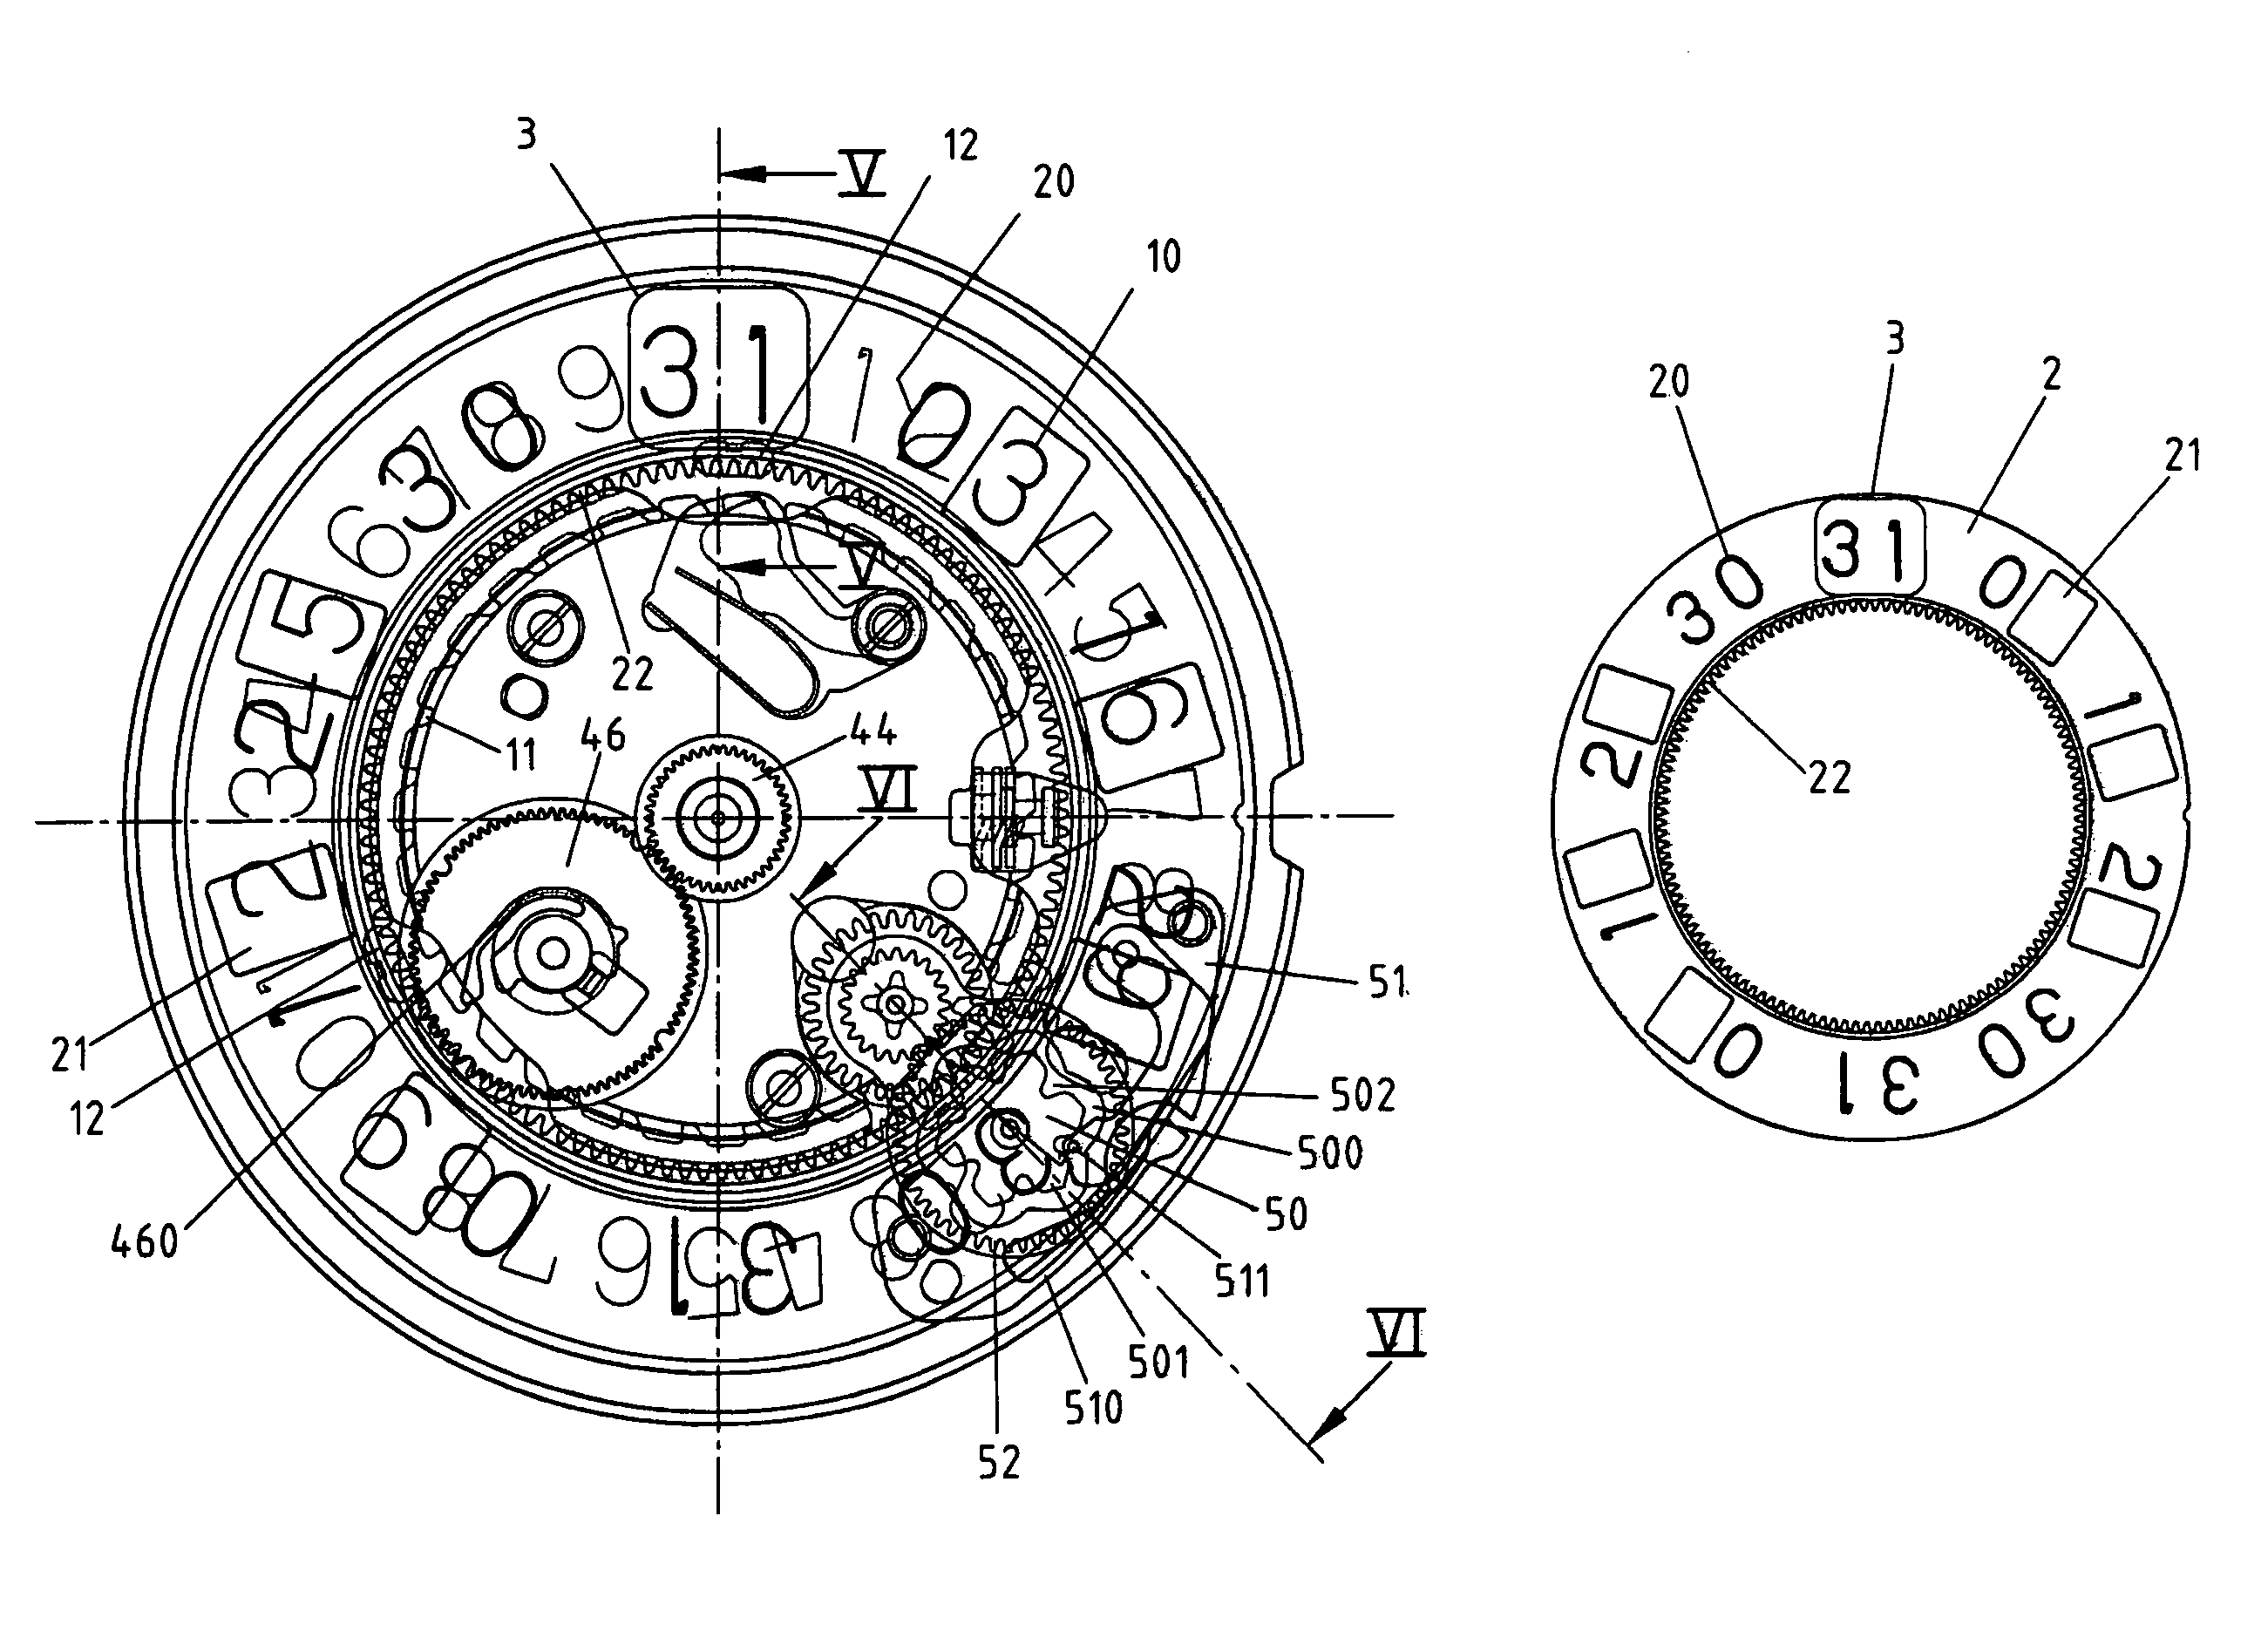 Day of the month display mechanism for watch movement